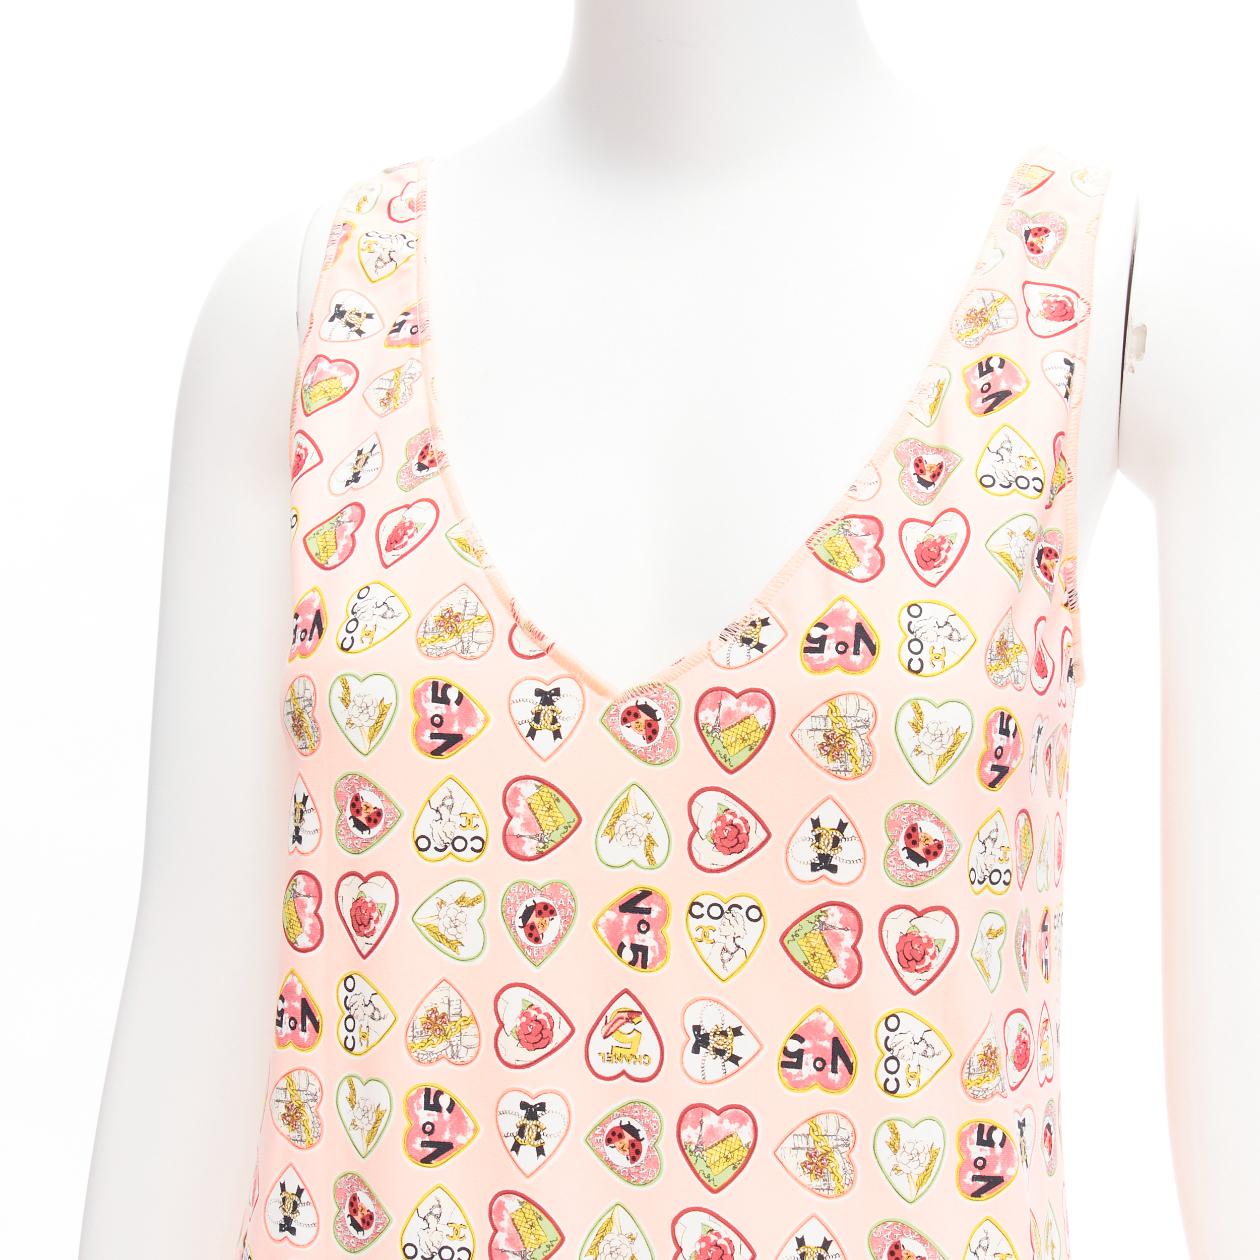 CHANEL 06P Vintage pink Valentino CC Heart Coco charm print V neck mini dress FR38 M
Reference: TGAS/D00385
Brand: Chanel
Designer: Karl Lagerfeld
Collection: 06P
Material: Polyamide, Elastane
Color: Pink
Pattern: Photographic Print
Closure: Slip